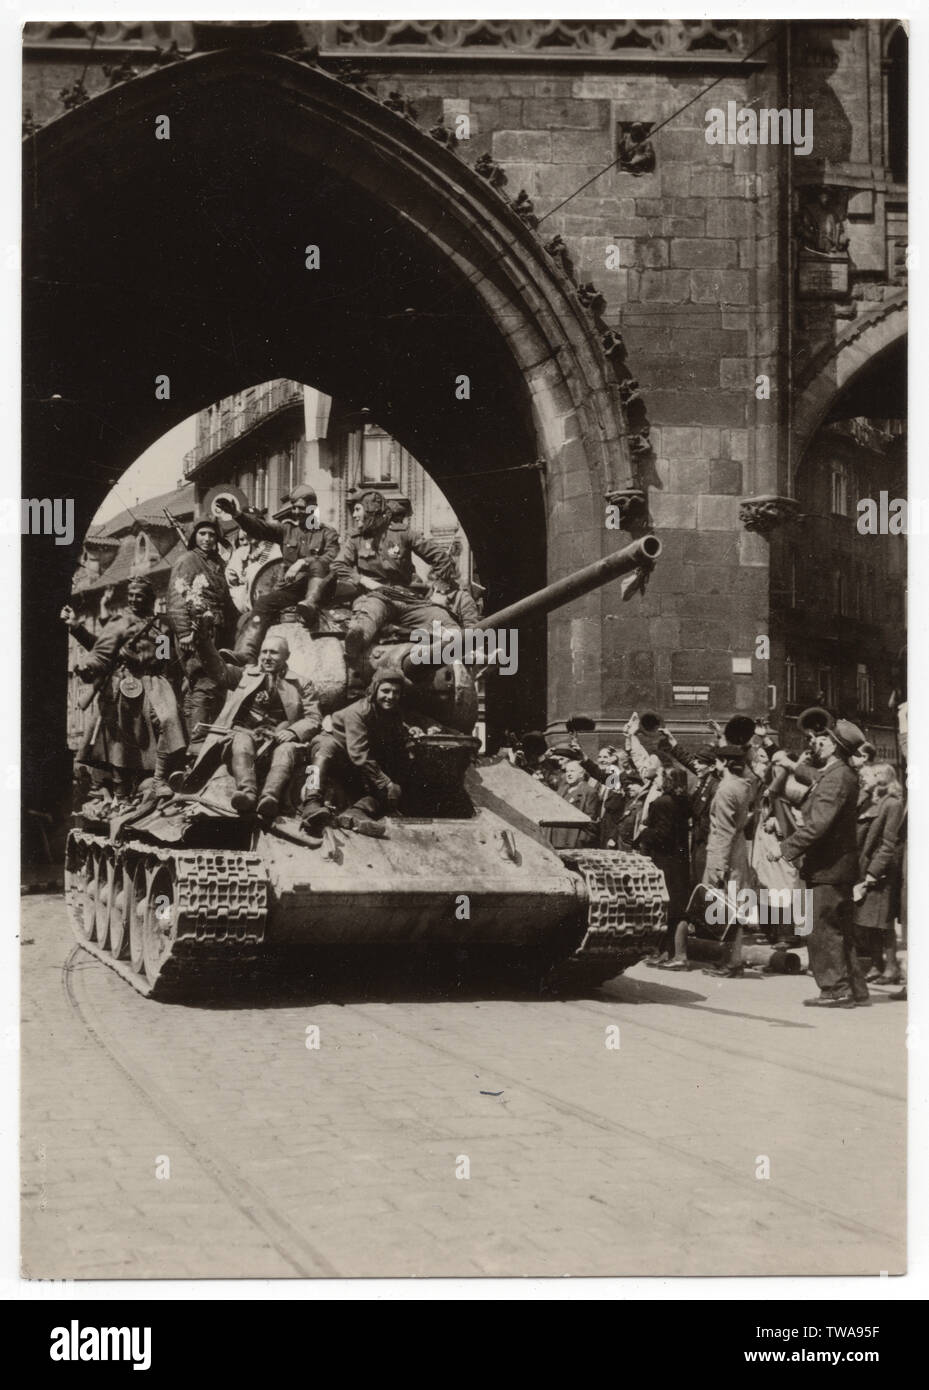 Red Army tank T-34 near the Powder Tower (Prašná brána) in Prague, Czechoslovakia, on 9 May 1945. Black and white photograph published in the Czechoslovak vintage postcard issued in 1955. Courtesy of the Azoor Postcard Collection. Stock Photo